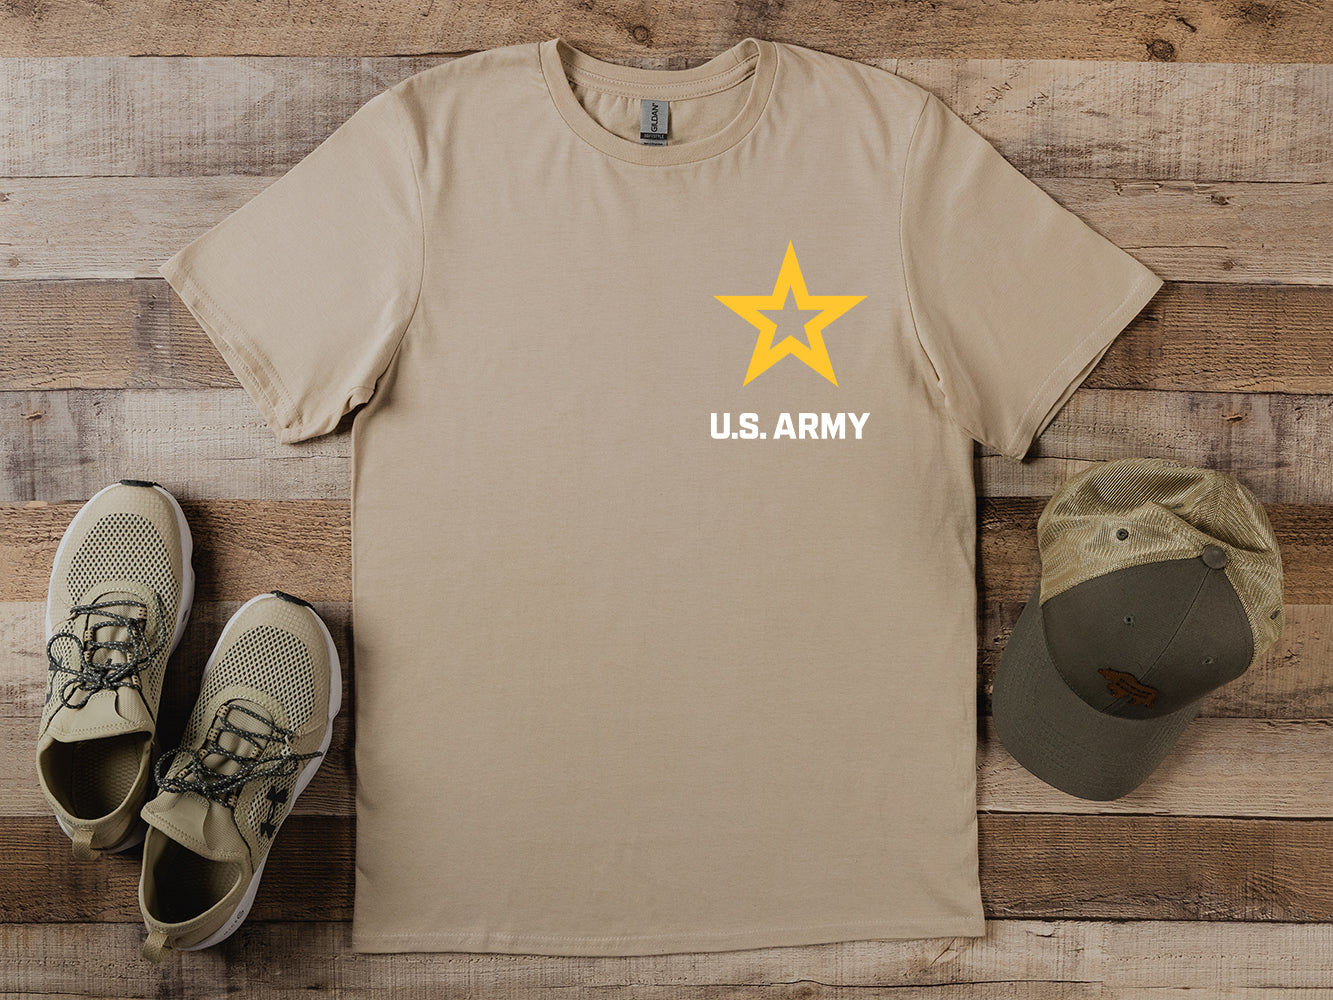 Officially Licensed U.S. Army Logo Crest T-shirt